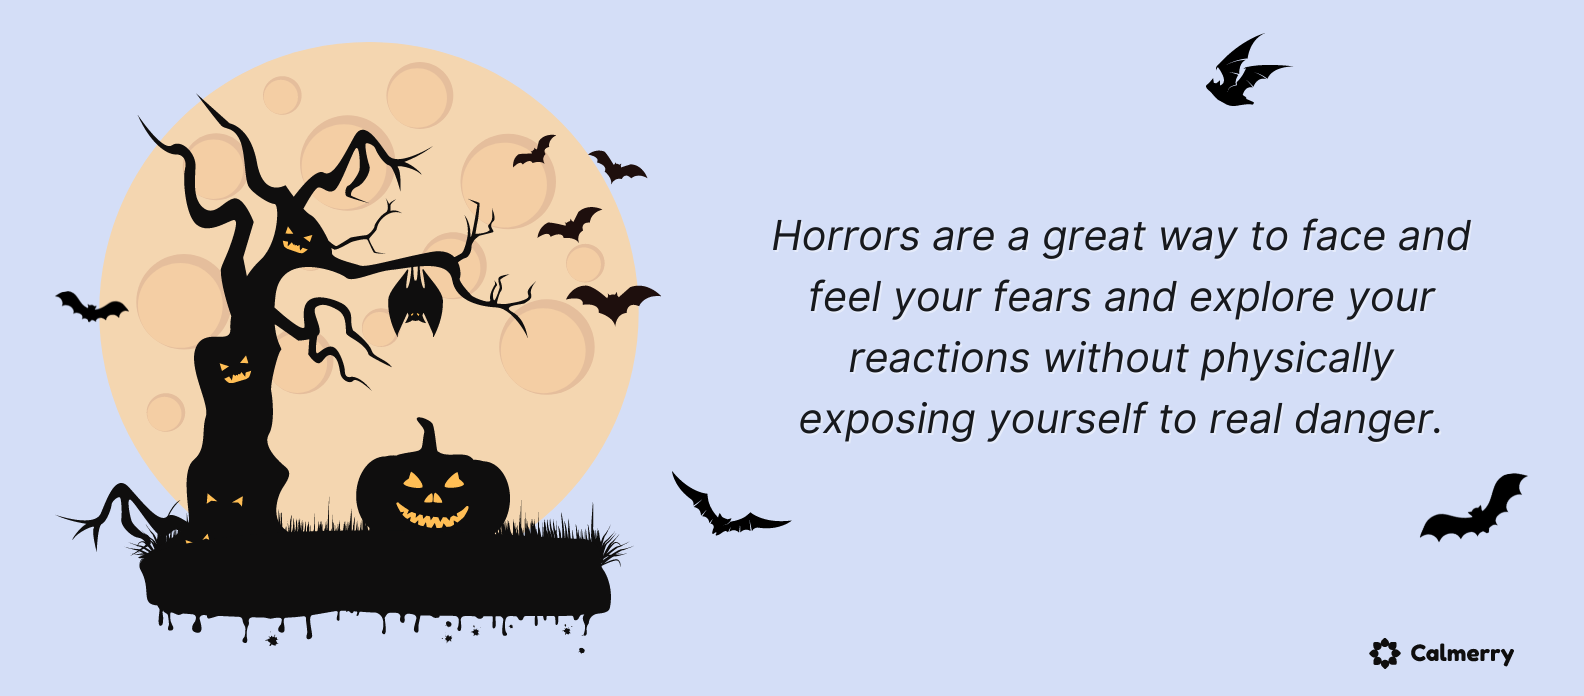 Horrors are a great way to face and feel your fears